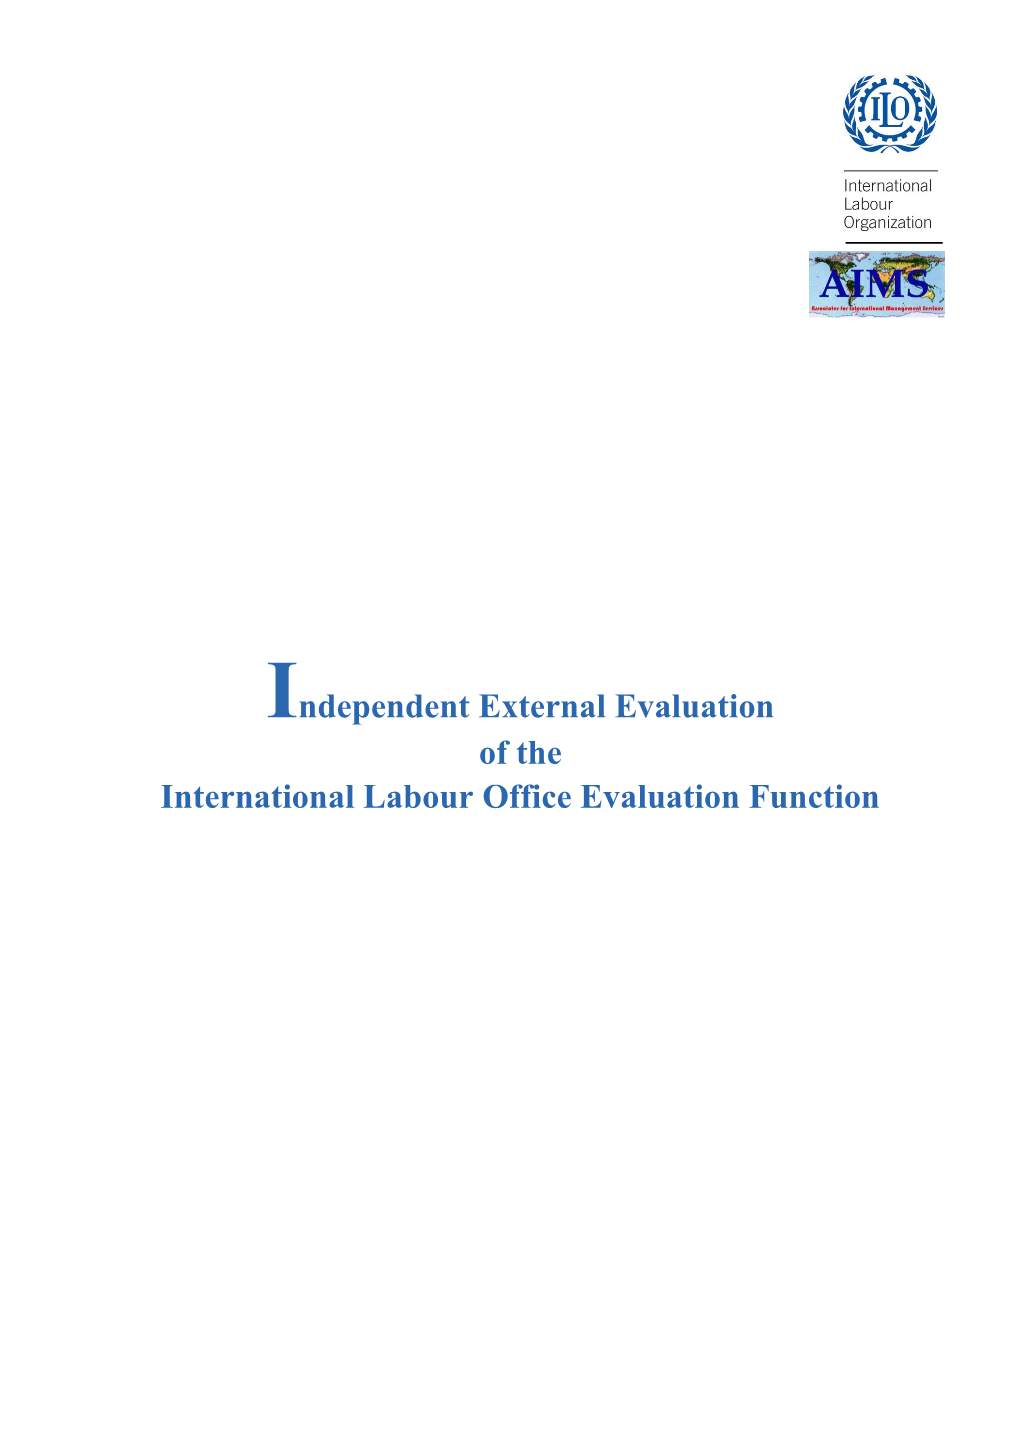 Independent External Evaluation of the International Labour Office Evaluation Function